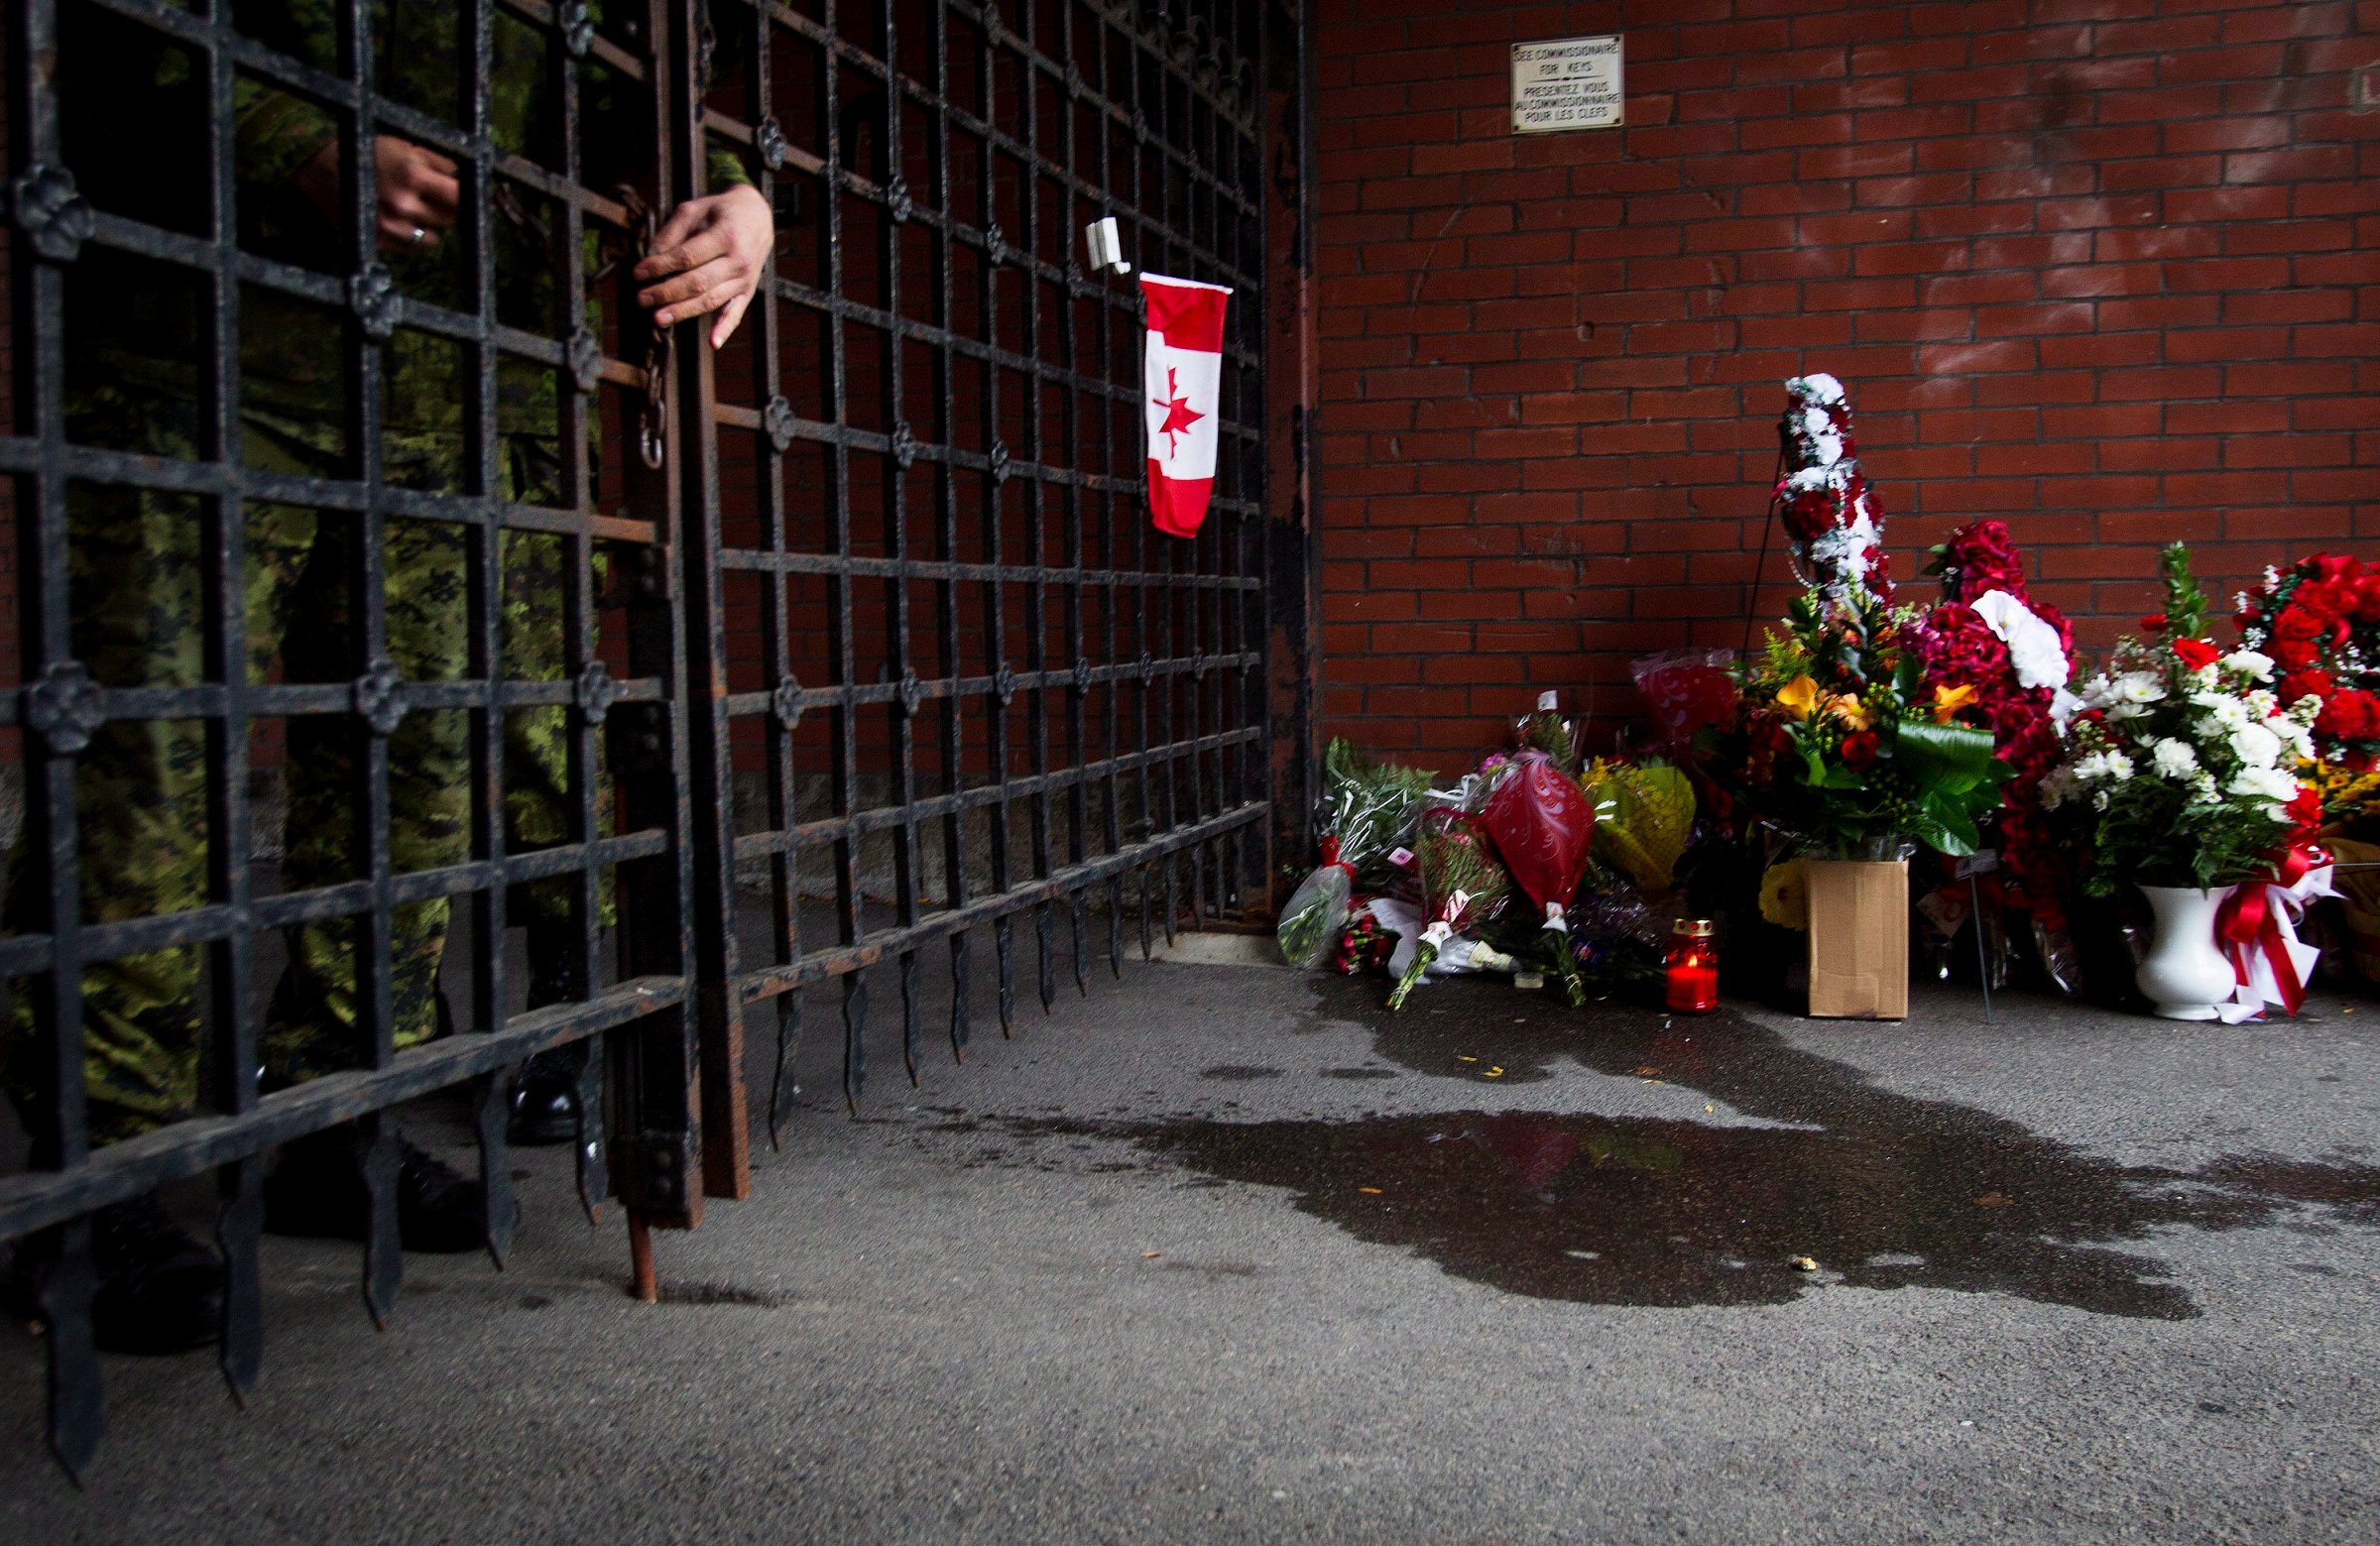 A soldier locks the gates as flowers are placed at a memorial outside the gates of the John Weir Foote Armory, the home of the Argyll and Sutherland Highlanders of Canada in Hamilton, Ontario on Oct. 22, 2014, in memory of Canadian soldier Nathan Cirillo.